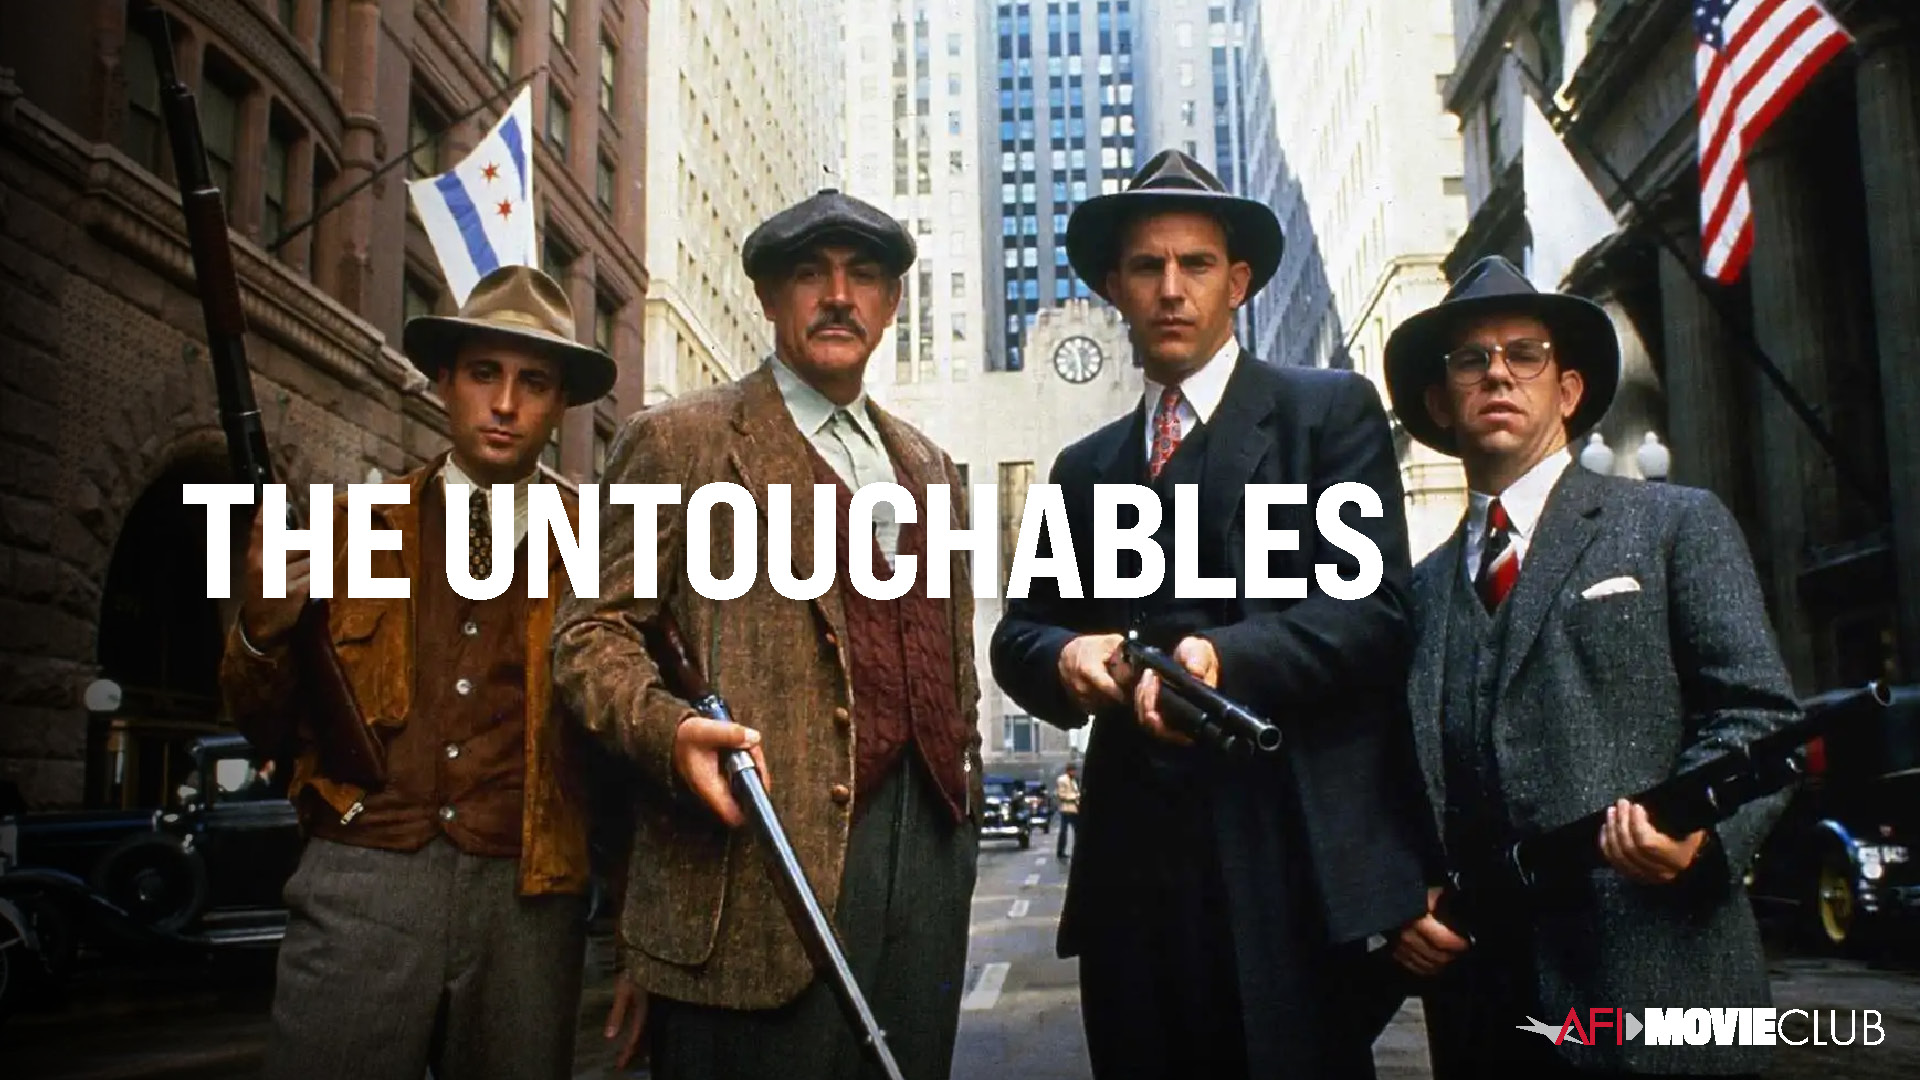 The Untouchables Film Still - Sean Connery, Kevin Costner, Andy Garcia, and Charles Martin Smith